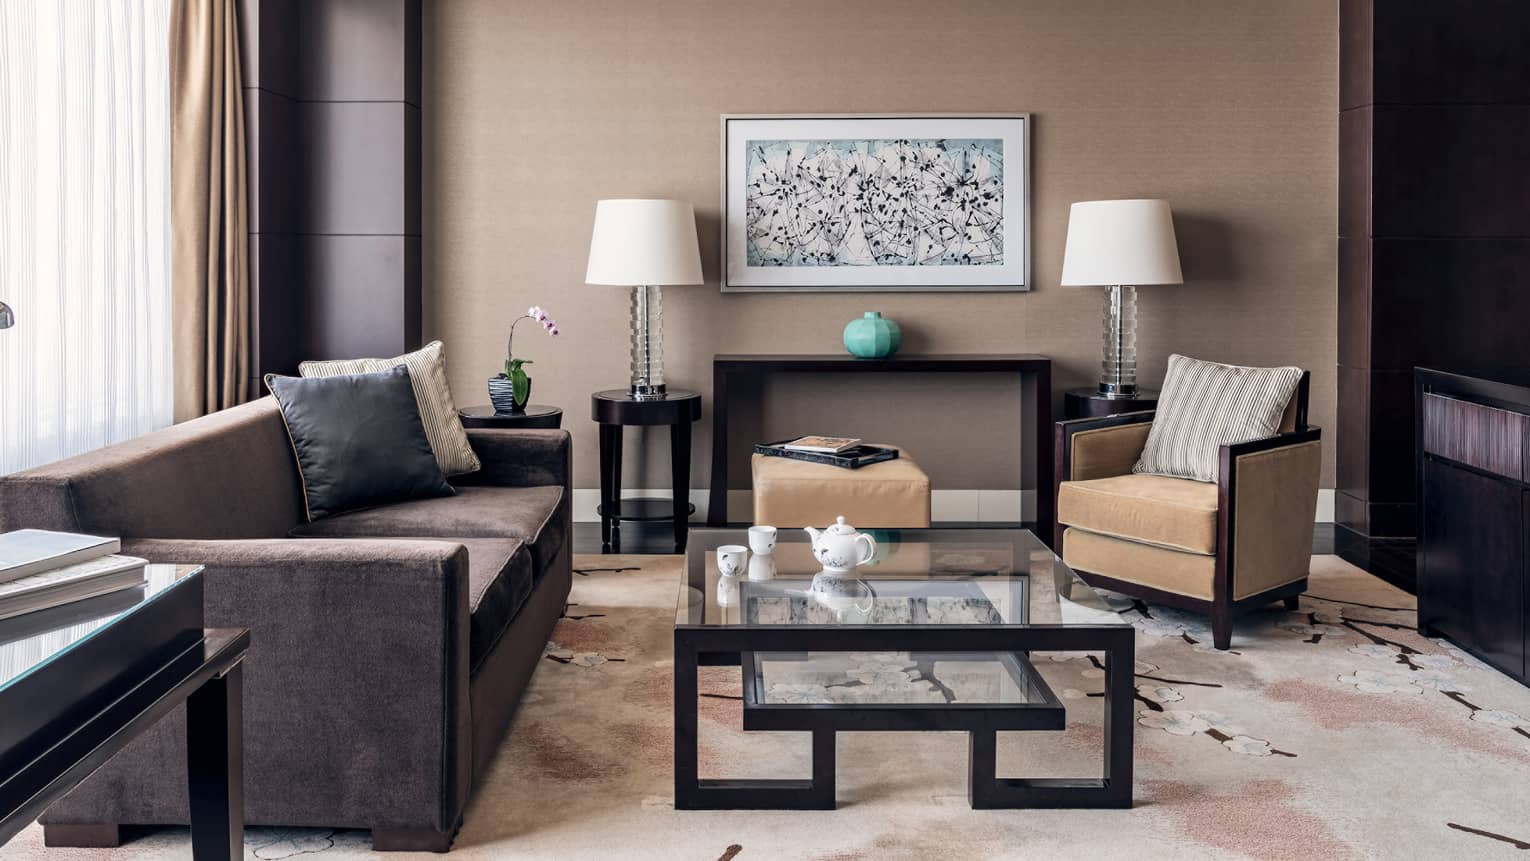 Brown coach, tan accent chair, glass nesting coffee table, brown and tan decor, floor-to-ceiling windows